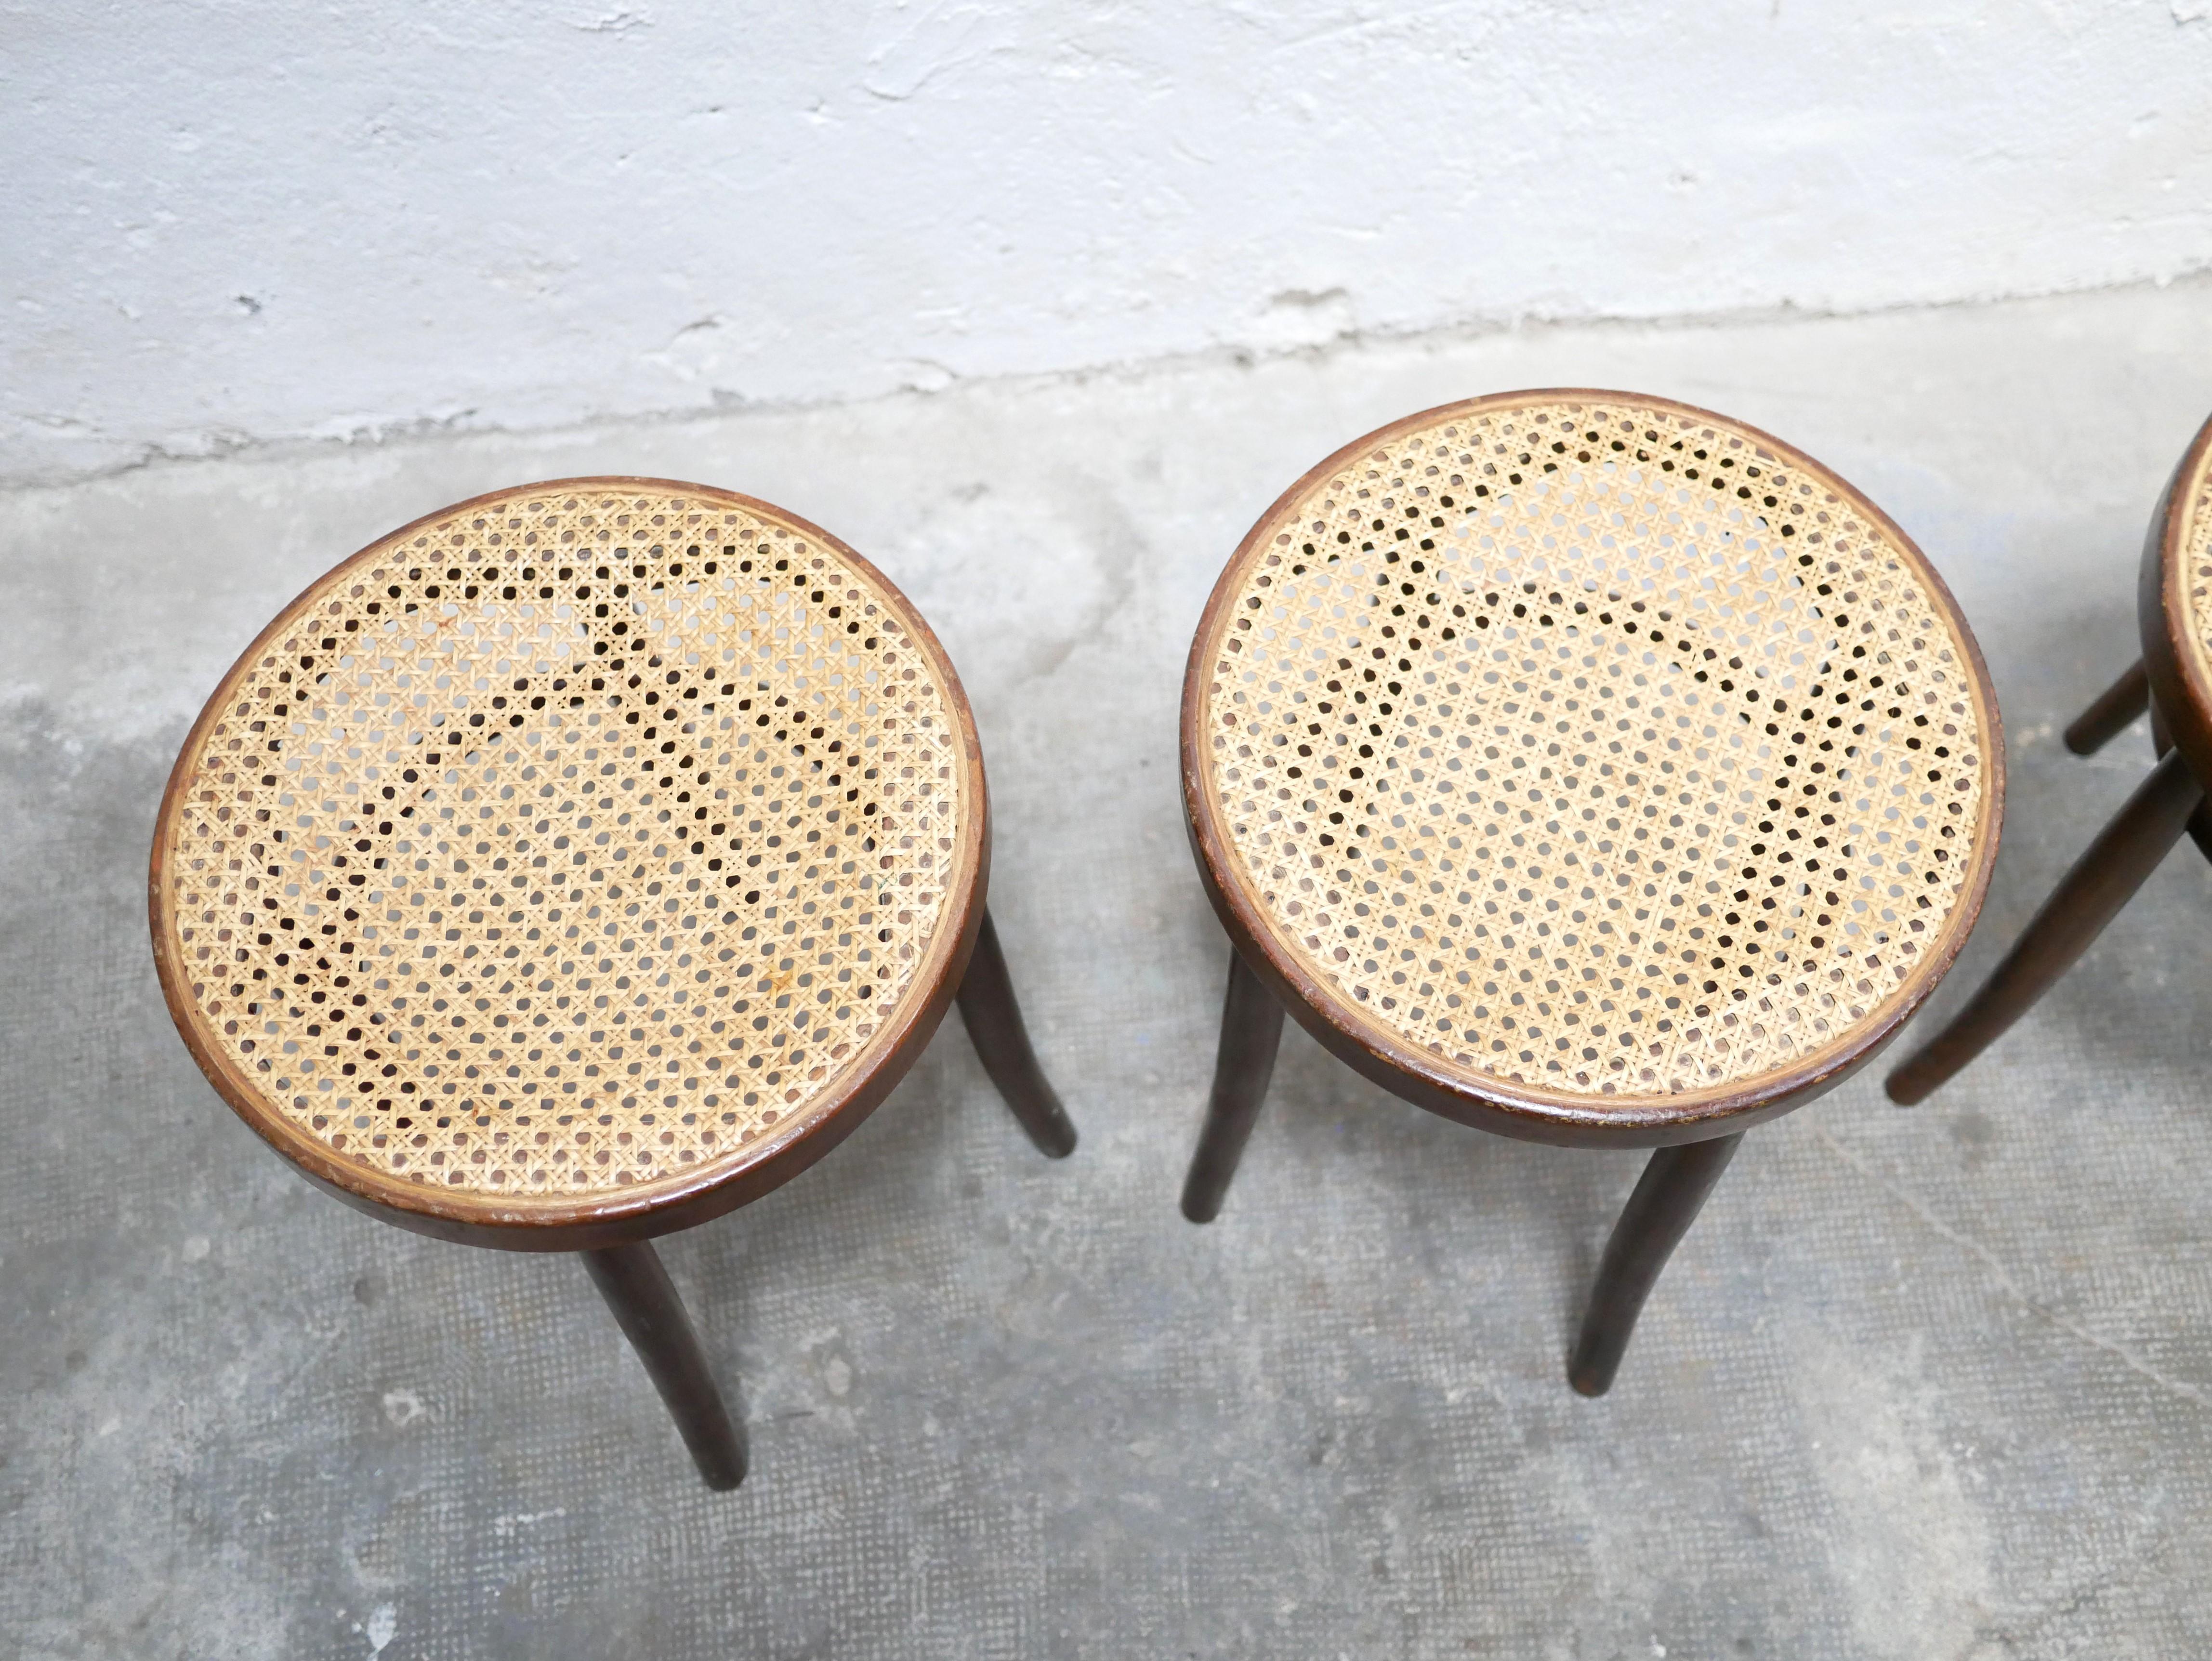 Caning Vintage Wooden Caned Stool